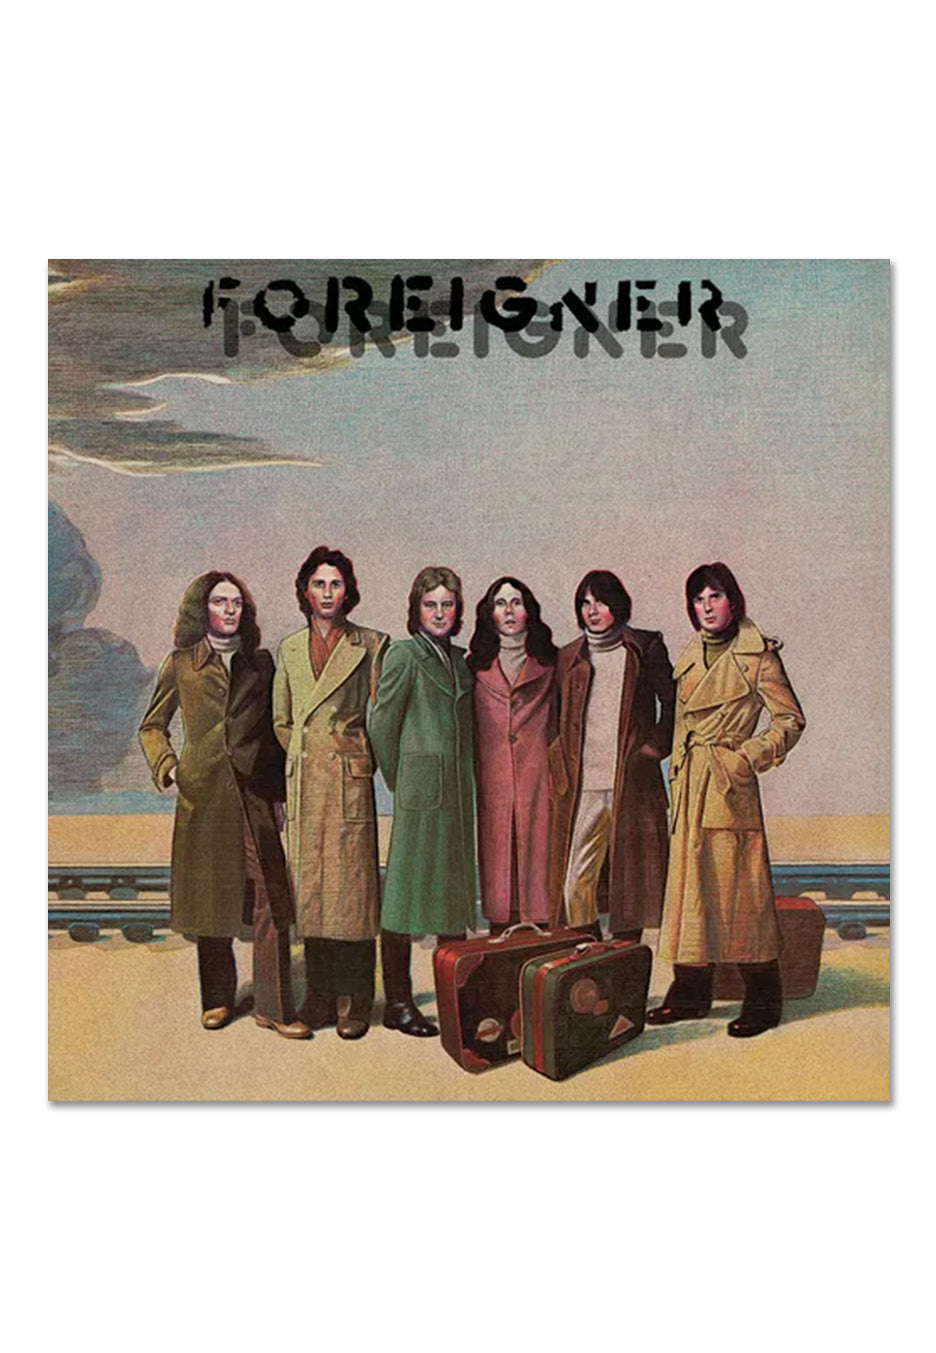 Foreigner - Foreigner Crystal Clear Diamond - Colored Vinyl